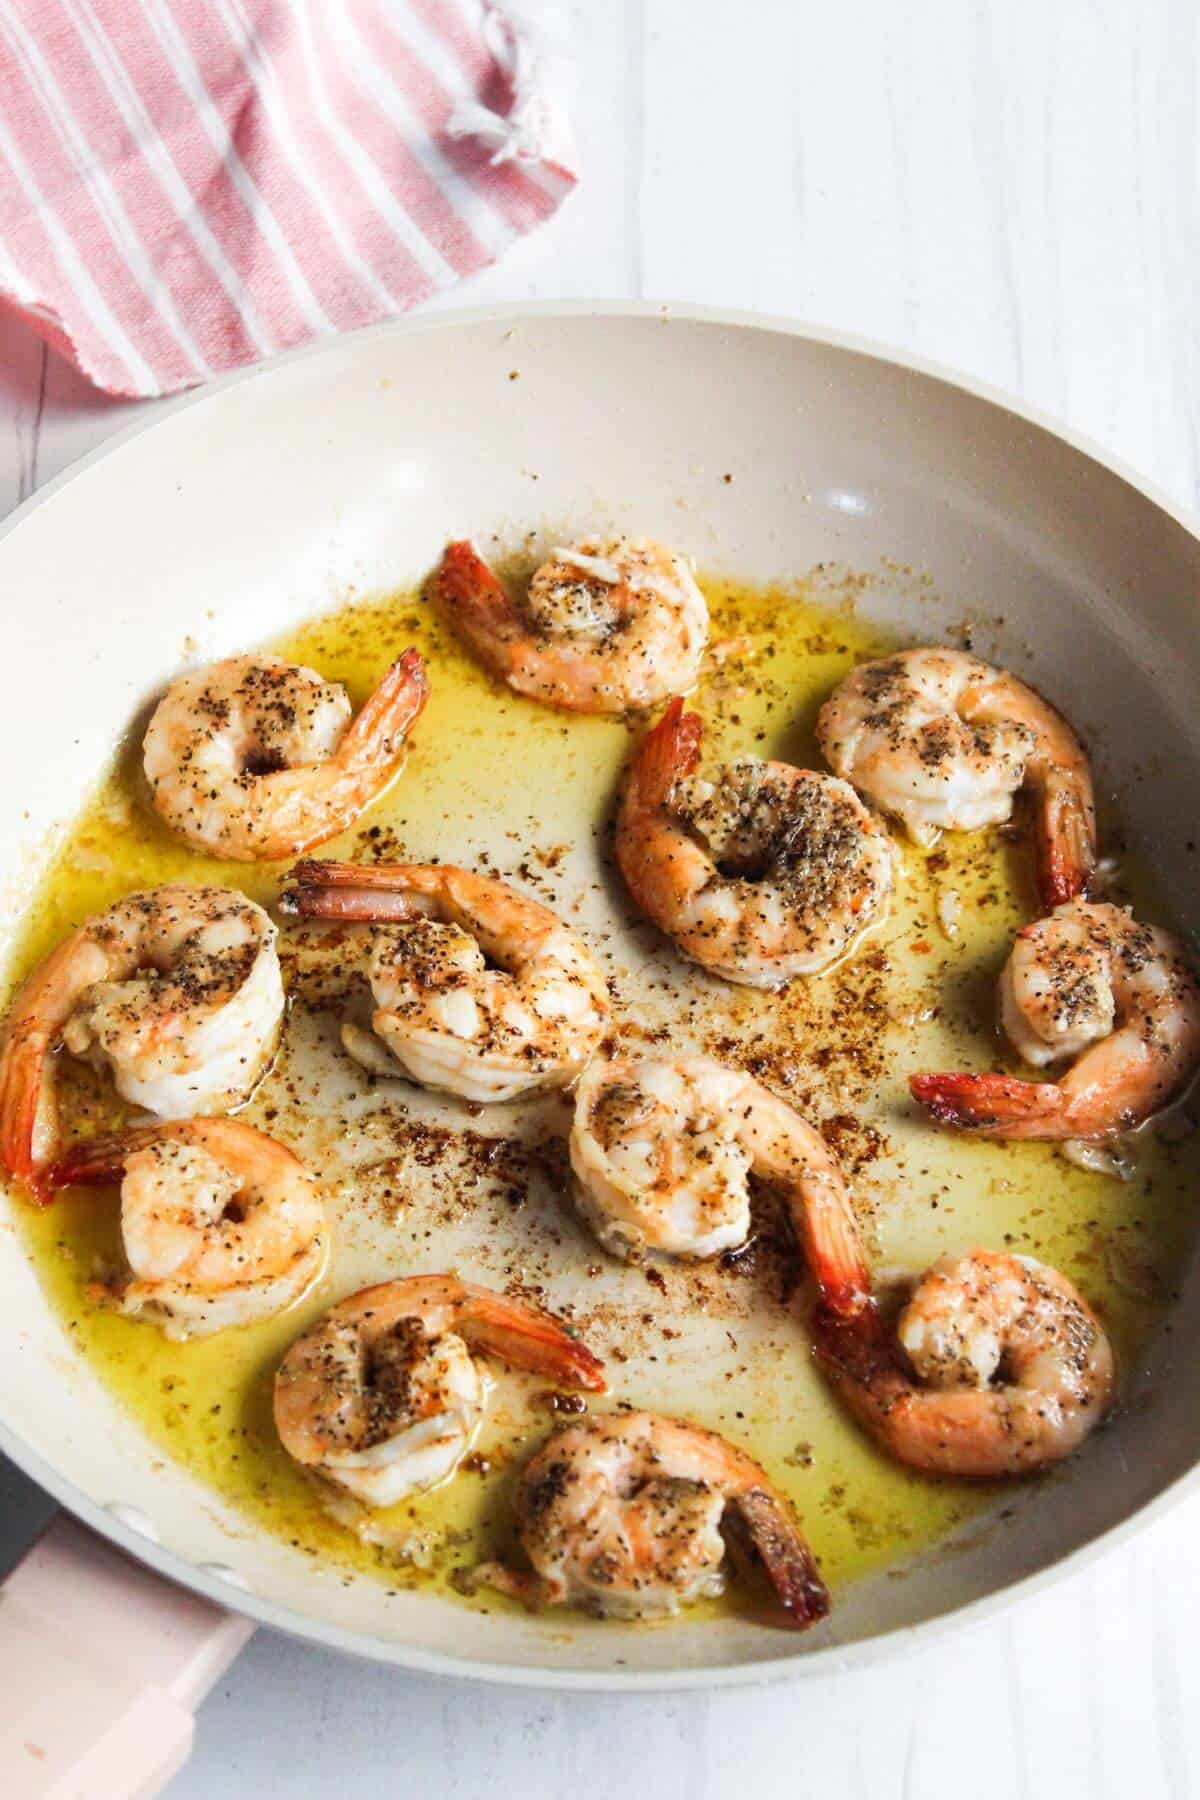 Shrimp in a frying pan with oil and spices.